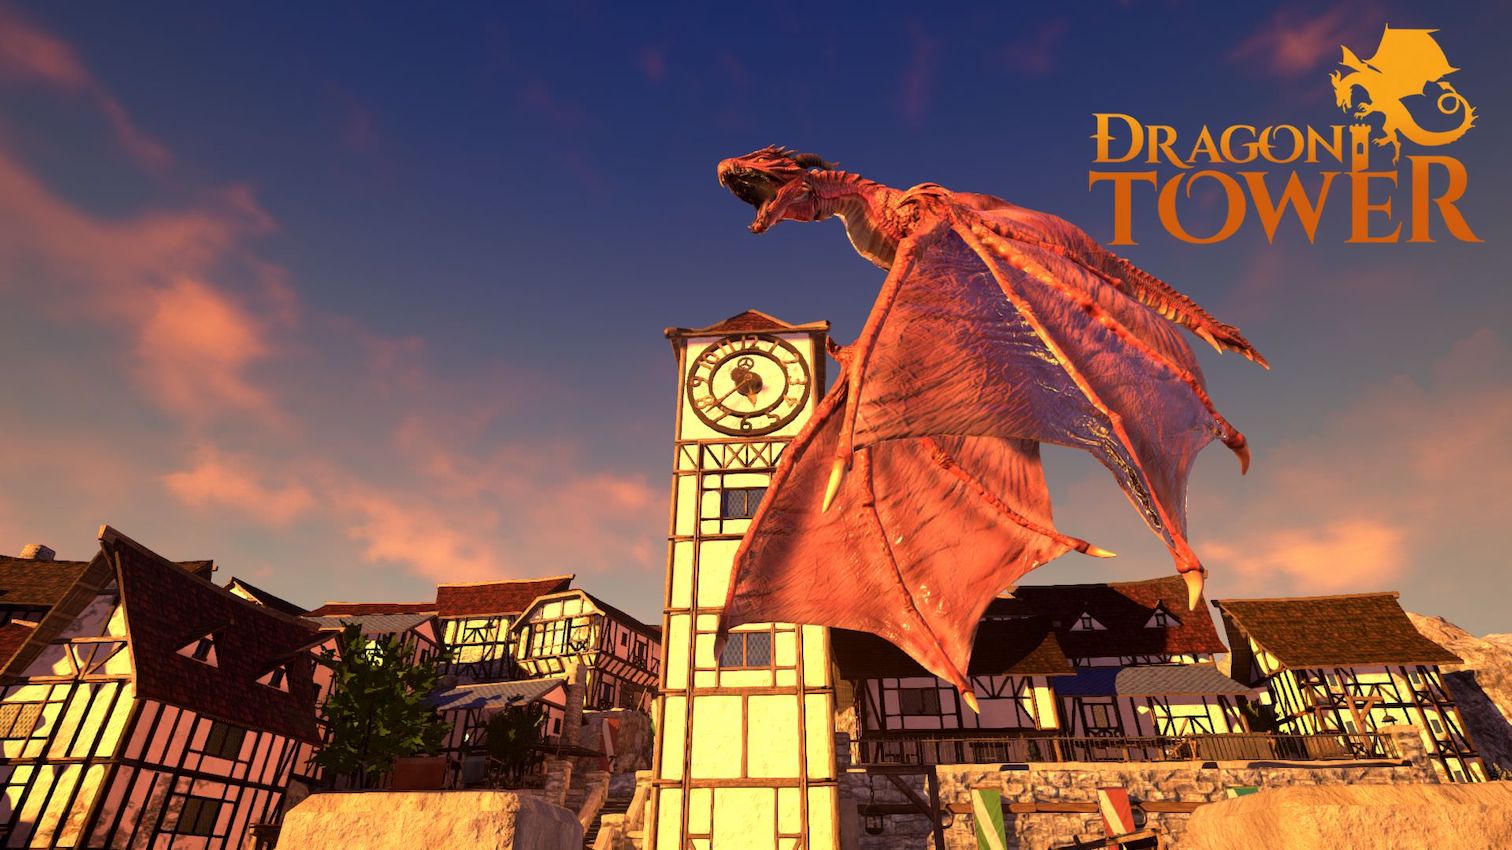 A virtual reality escape room in where players solve puzzles in a tower trying to escape the dragons.